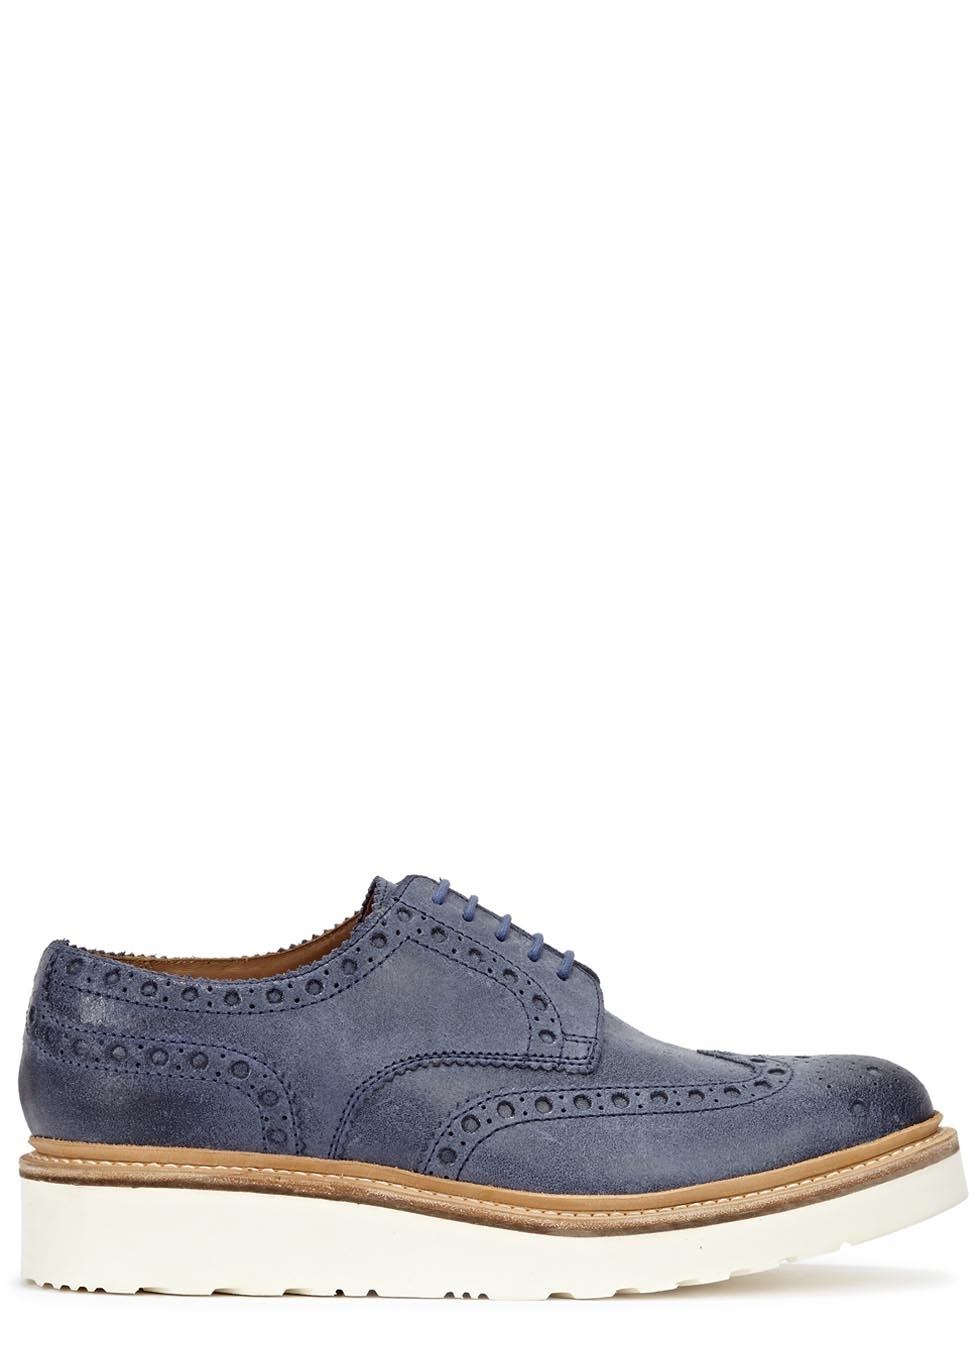 Archie blue brushed leather brogues